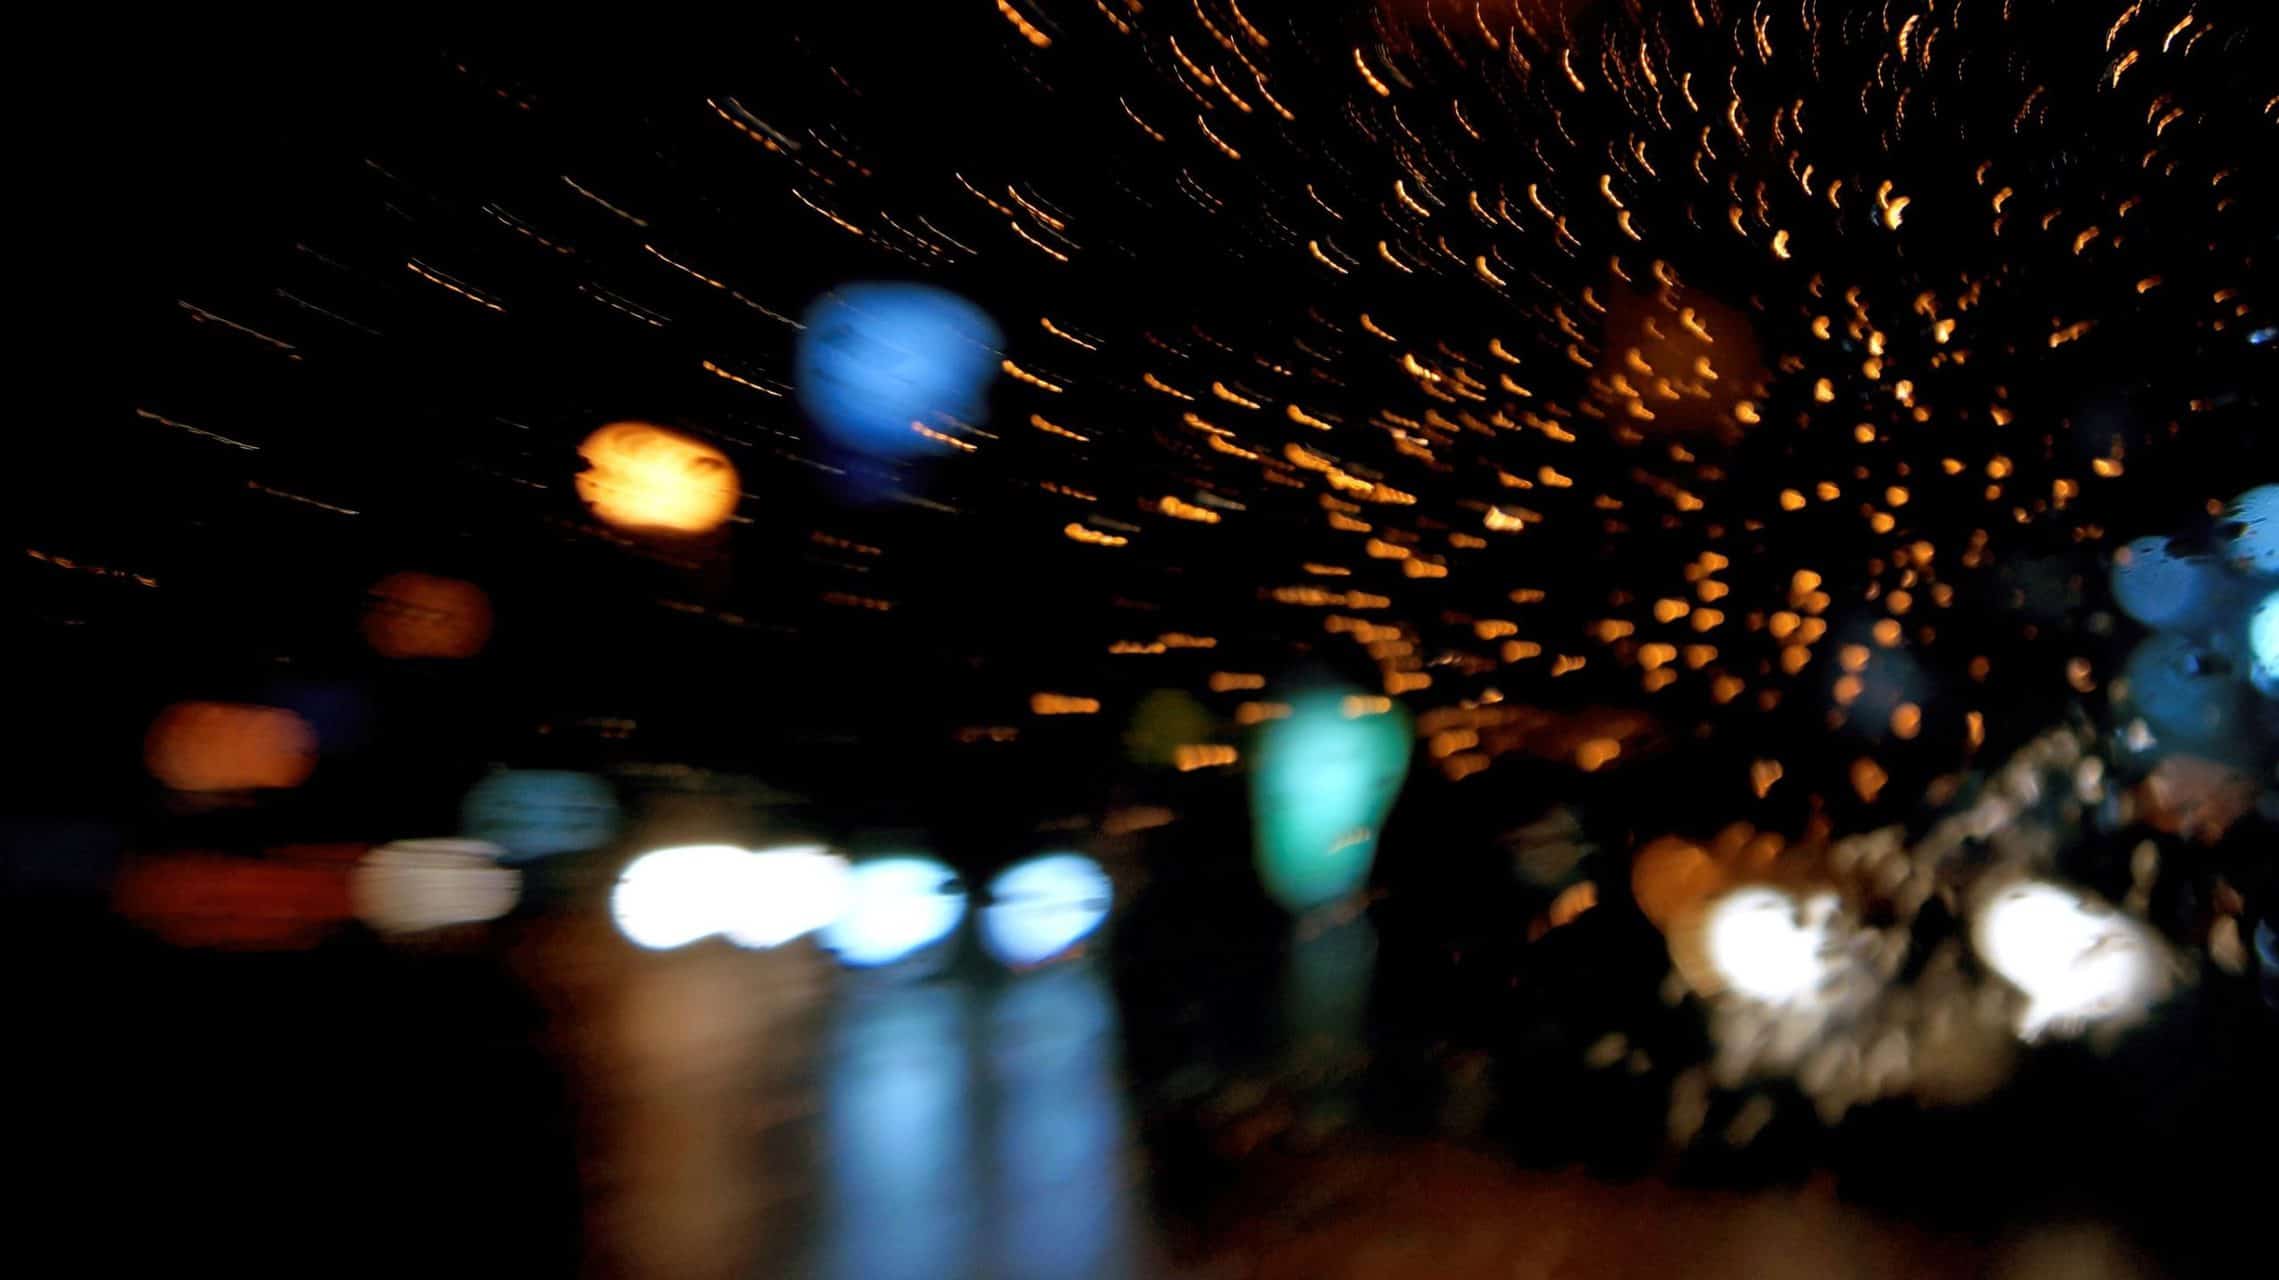 10 Expert Tips to Prevent Blurry Photos When Zooming In